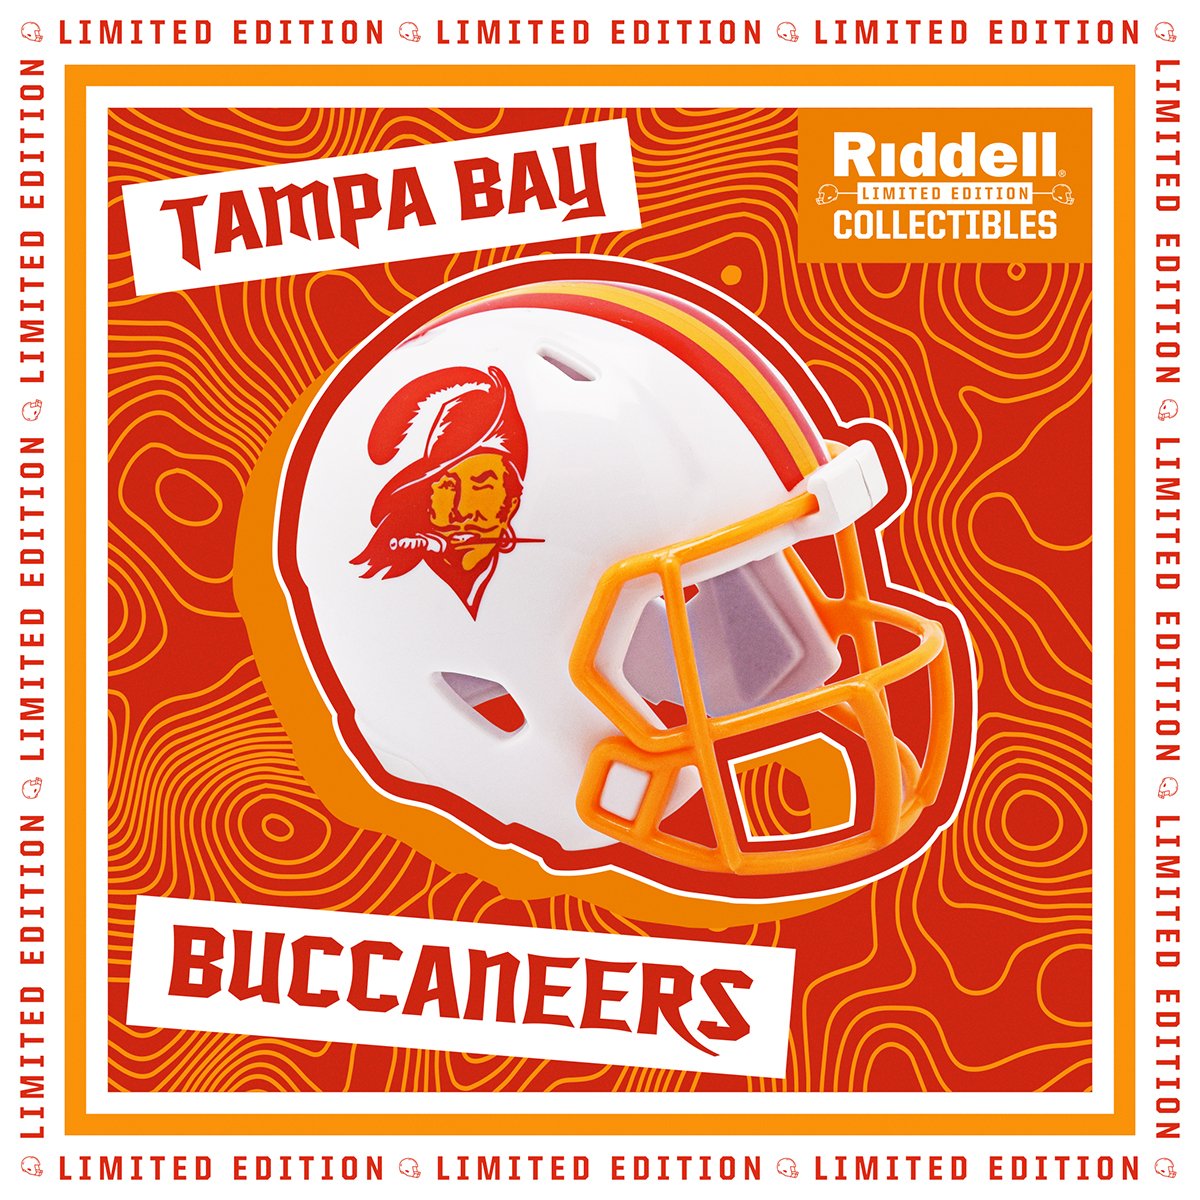 An iconic throwback. This @Buccaneers Limited Edition Pocket Size Helmet drops tomorrow at 10am CT only on Riddell.com